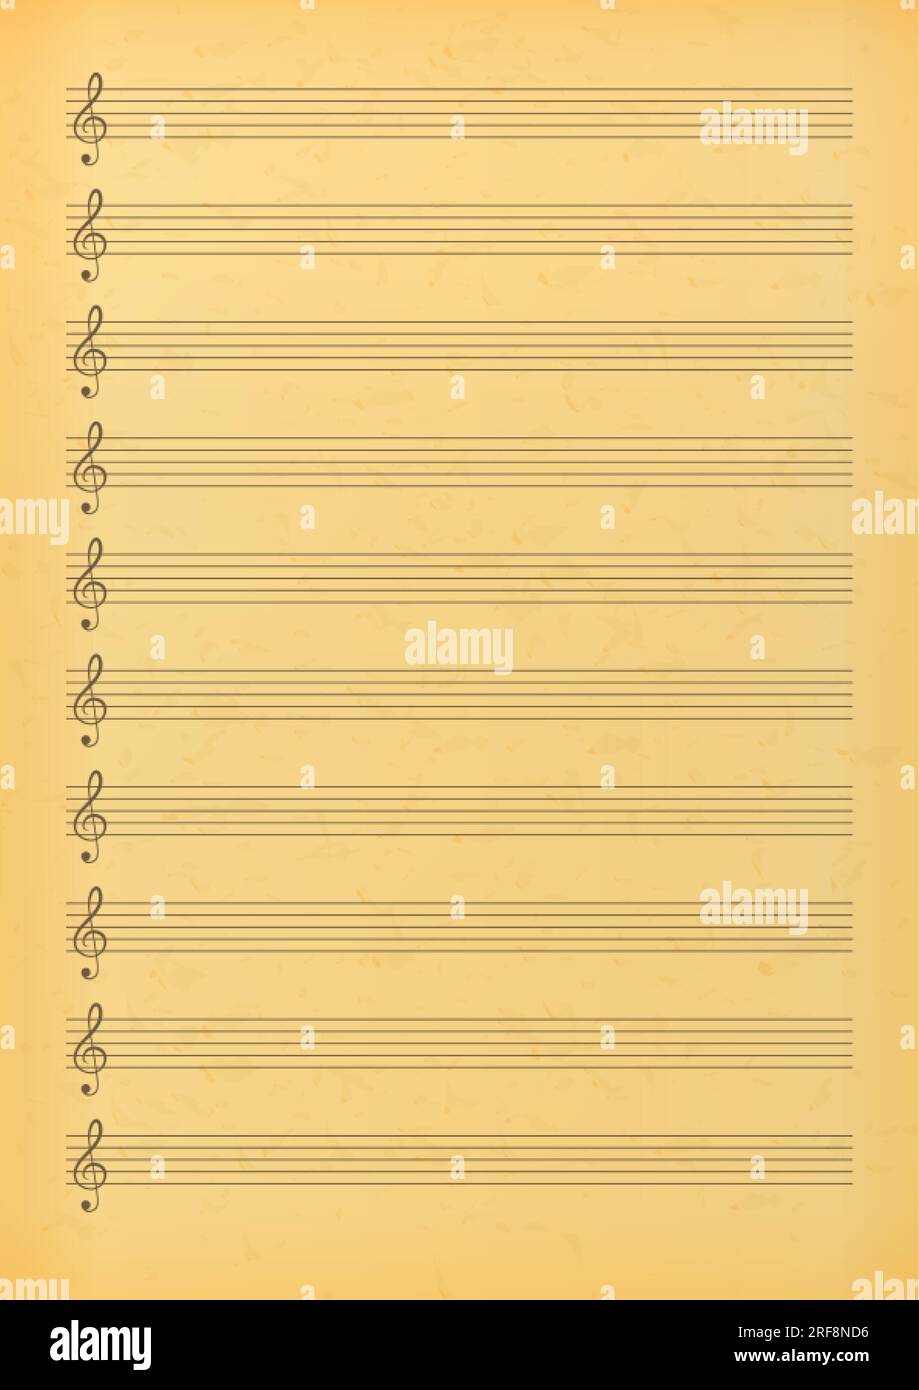 vintage-blank-sheet-music-page-old-music-paper-with-empty-stave-for-writing-notes-stock-vector